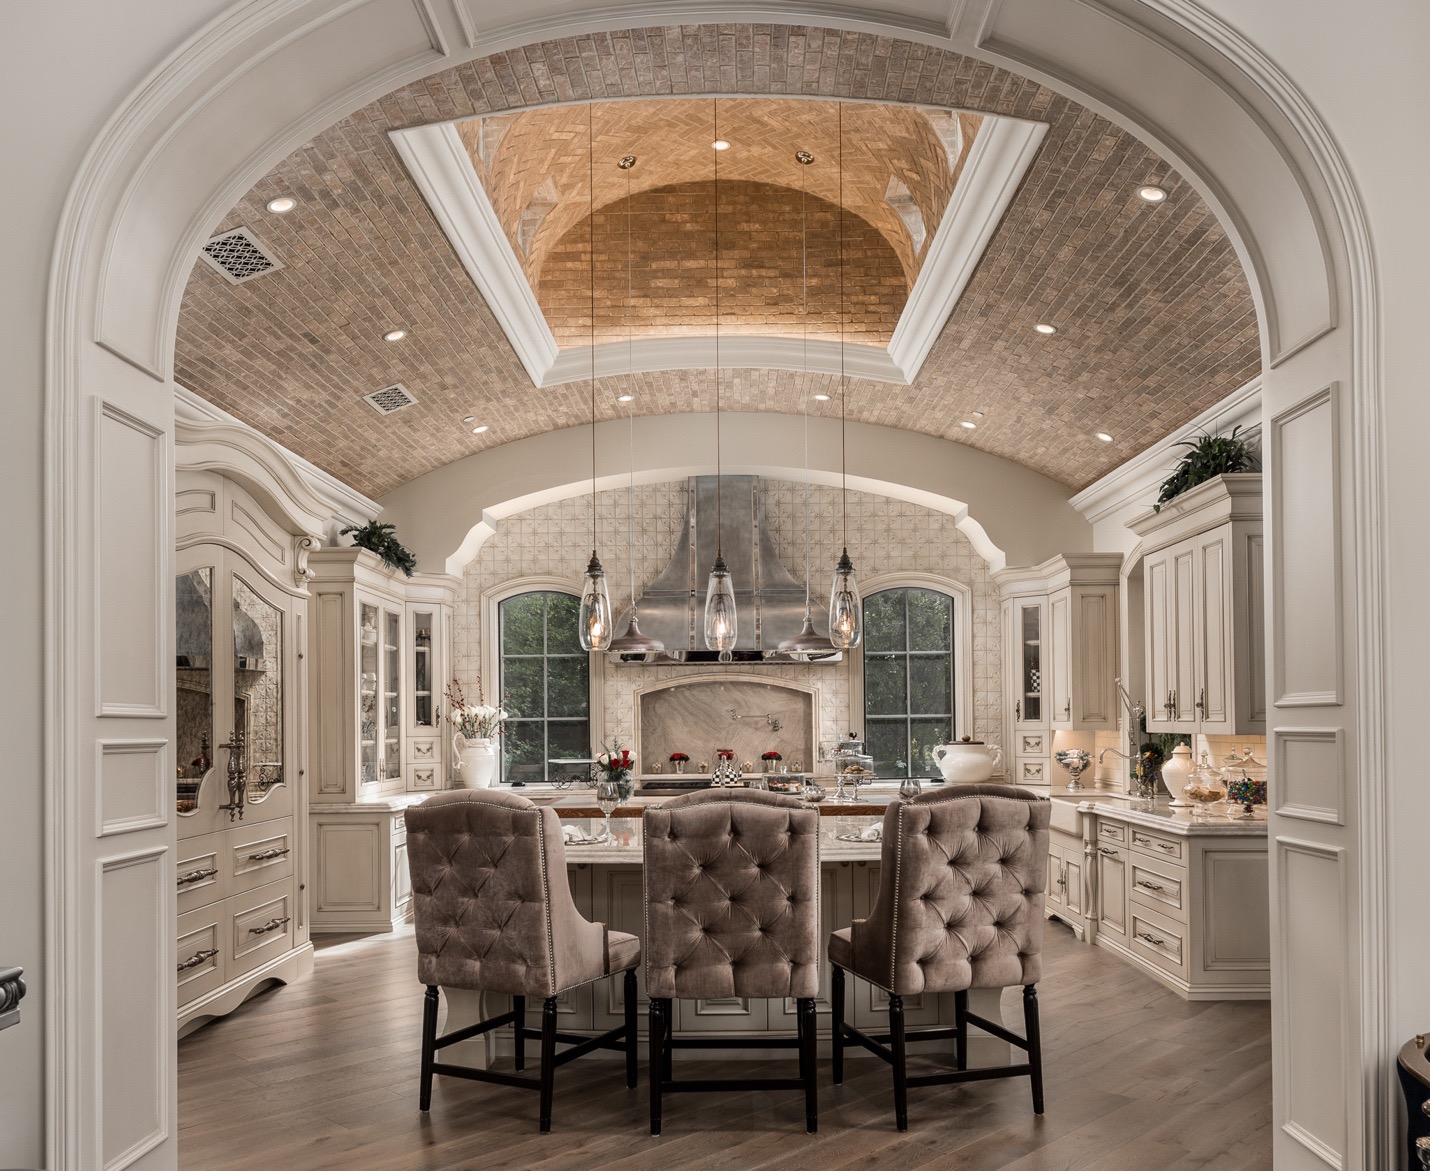 An exquisite kitchen featuring a high, arched brick ceiling with recessed lighting and a sophisticated pendant light fixture. The space is centered around a large island with a white marble countertop and tufted upholstered barstools. The cabinetry is painted in a soft cream color, complementing the elegant design. A grand range hood, flanked by windows, sits above the professional-grade stove. The kitchen is adorned with intricate moldings and detailed paneling, creating a classic and luxurious ambiance. The floor is covered with light wood planks, adding warmth to the refined decor. A decorative archway frames the view into this beautifully designed kitchen, enhancing its opulent feel.